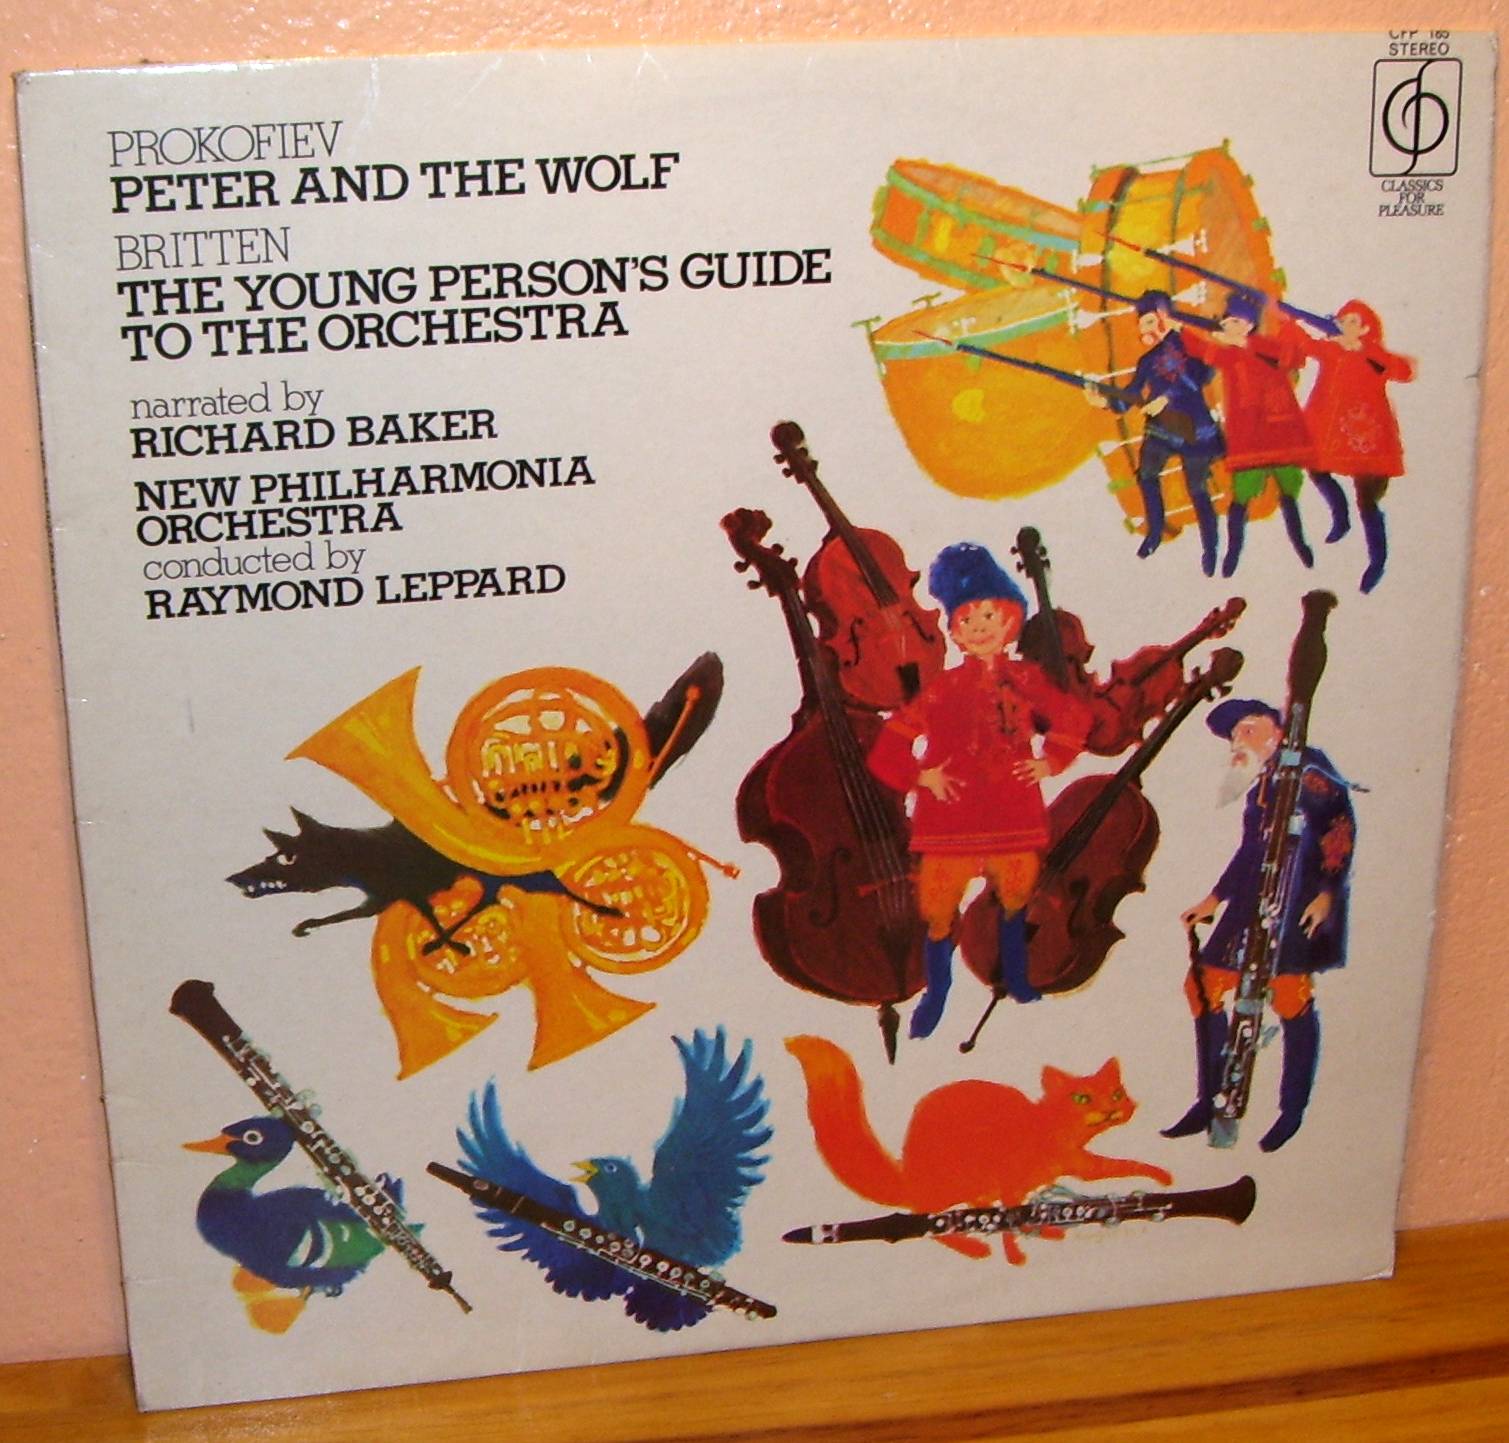 33T Prokofiev - Peter and the wolf - 1971.jpg